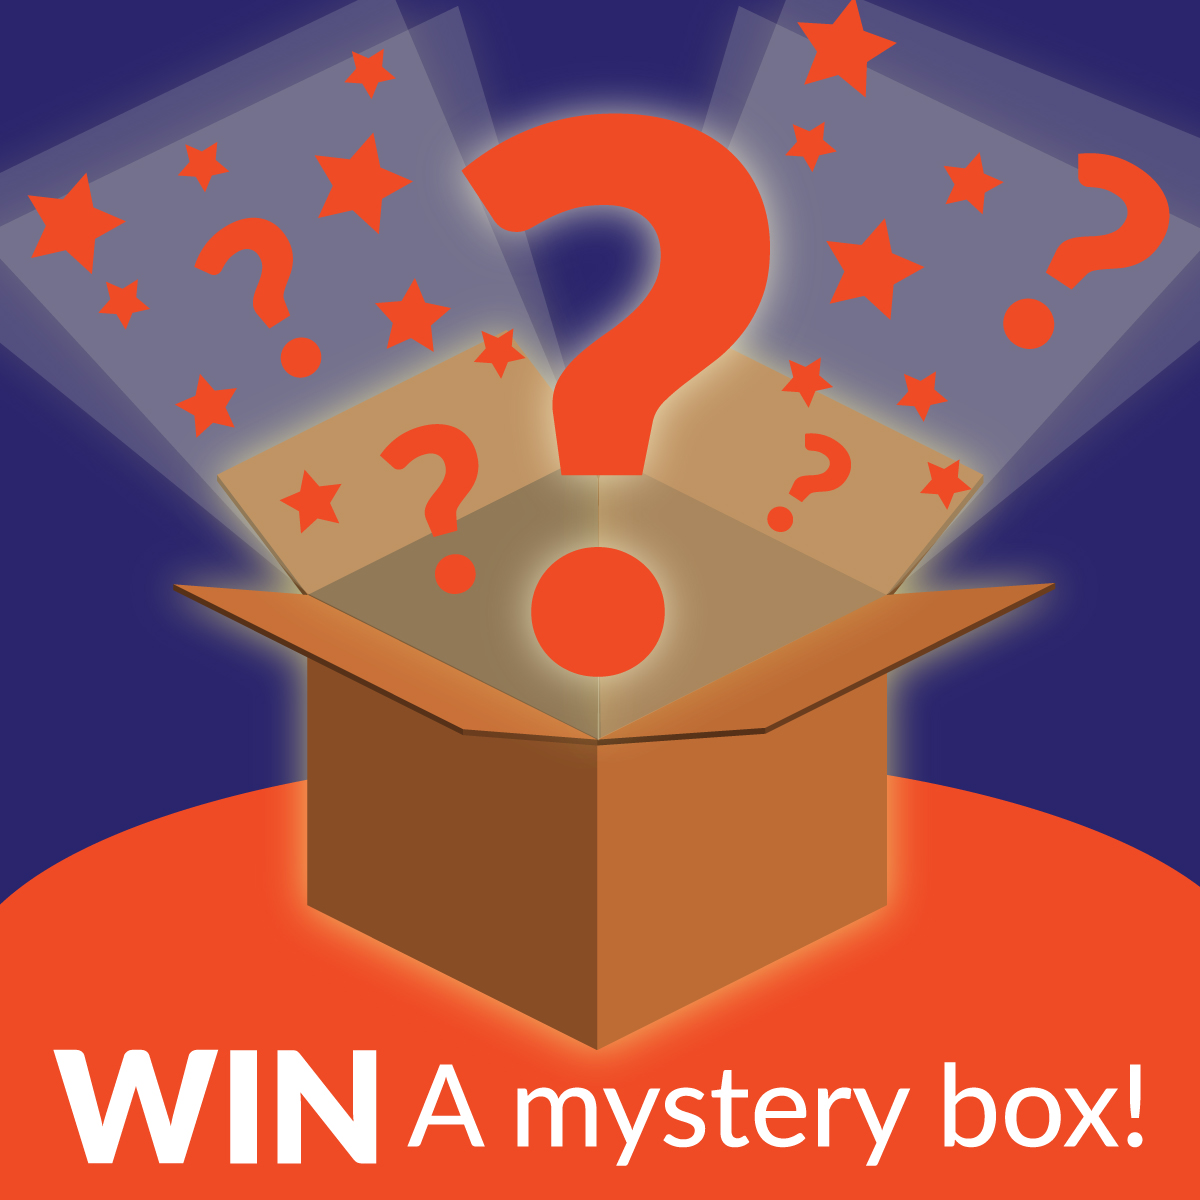 🎉 GIVEAWAY TIME 🎉 😍👉 Enter now for your chance to #WIN a Range Mystery Box: 1. Like this 2. Retweet 3. Follow us Good Luck! 🤞 Winner chosen at random. Competition ends 06/01/2023. Competition open to UK and ROI residents. T&Cs apply